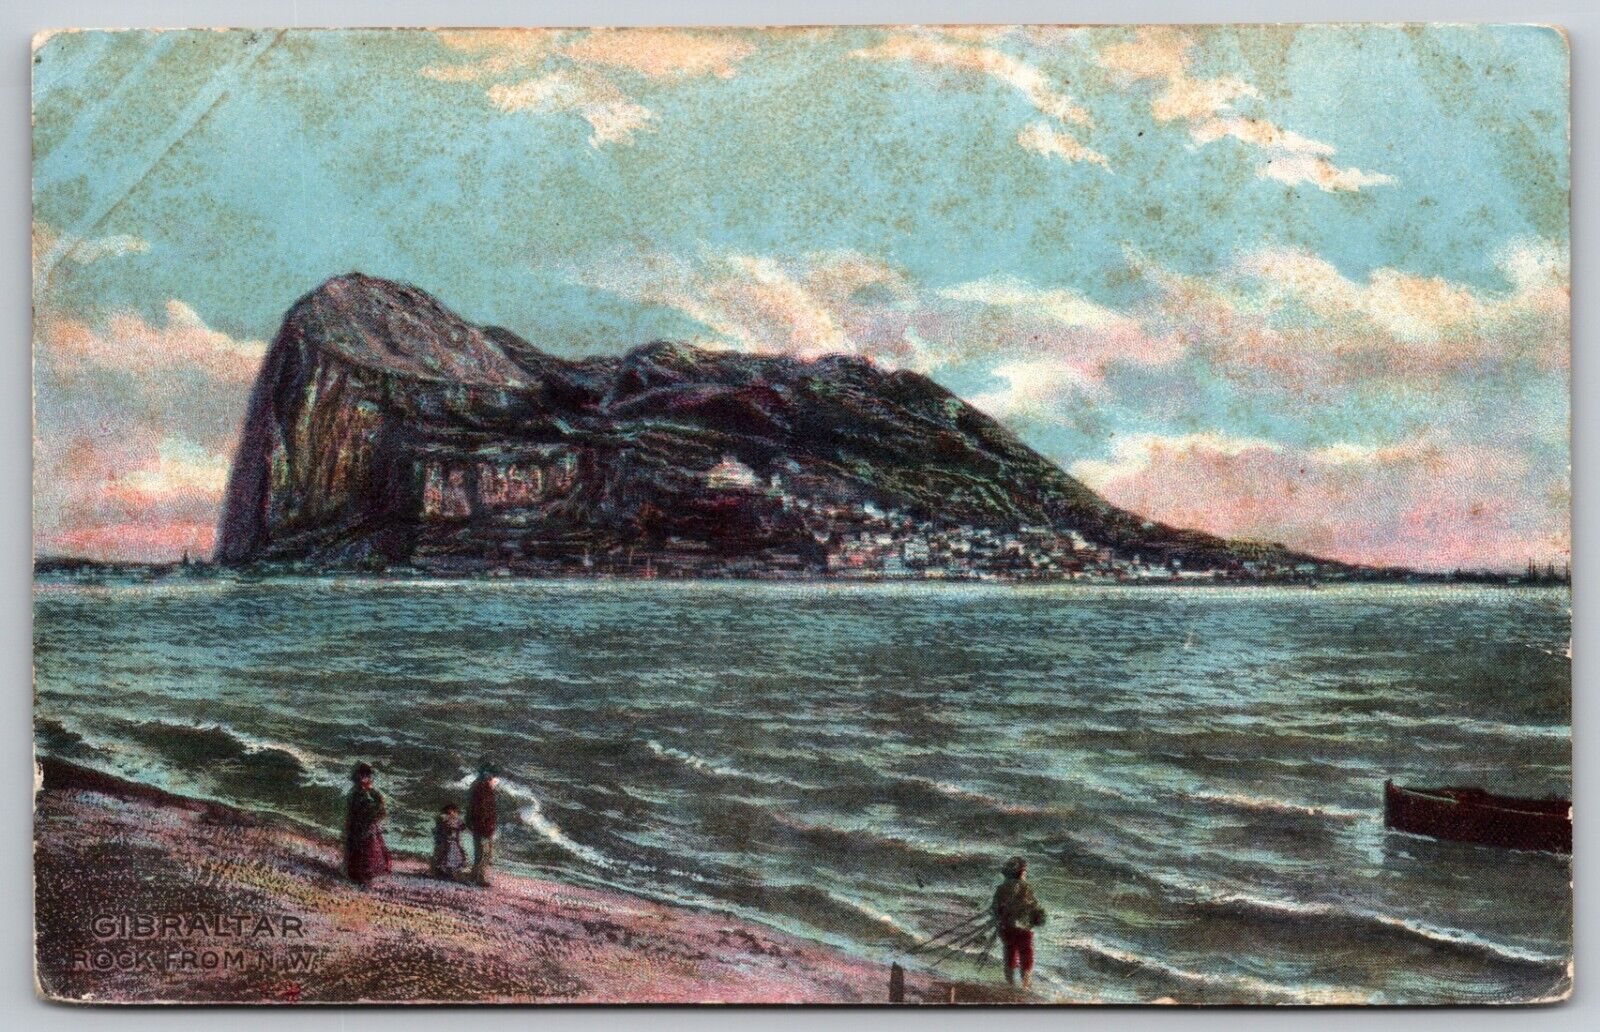 Gibraltar Rock from NW Prudential Insurance Co of America c.1909 Postcard